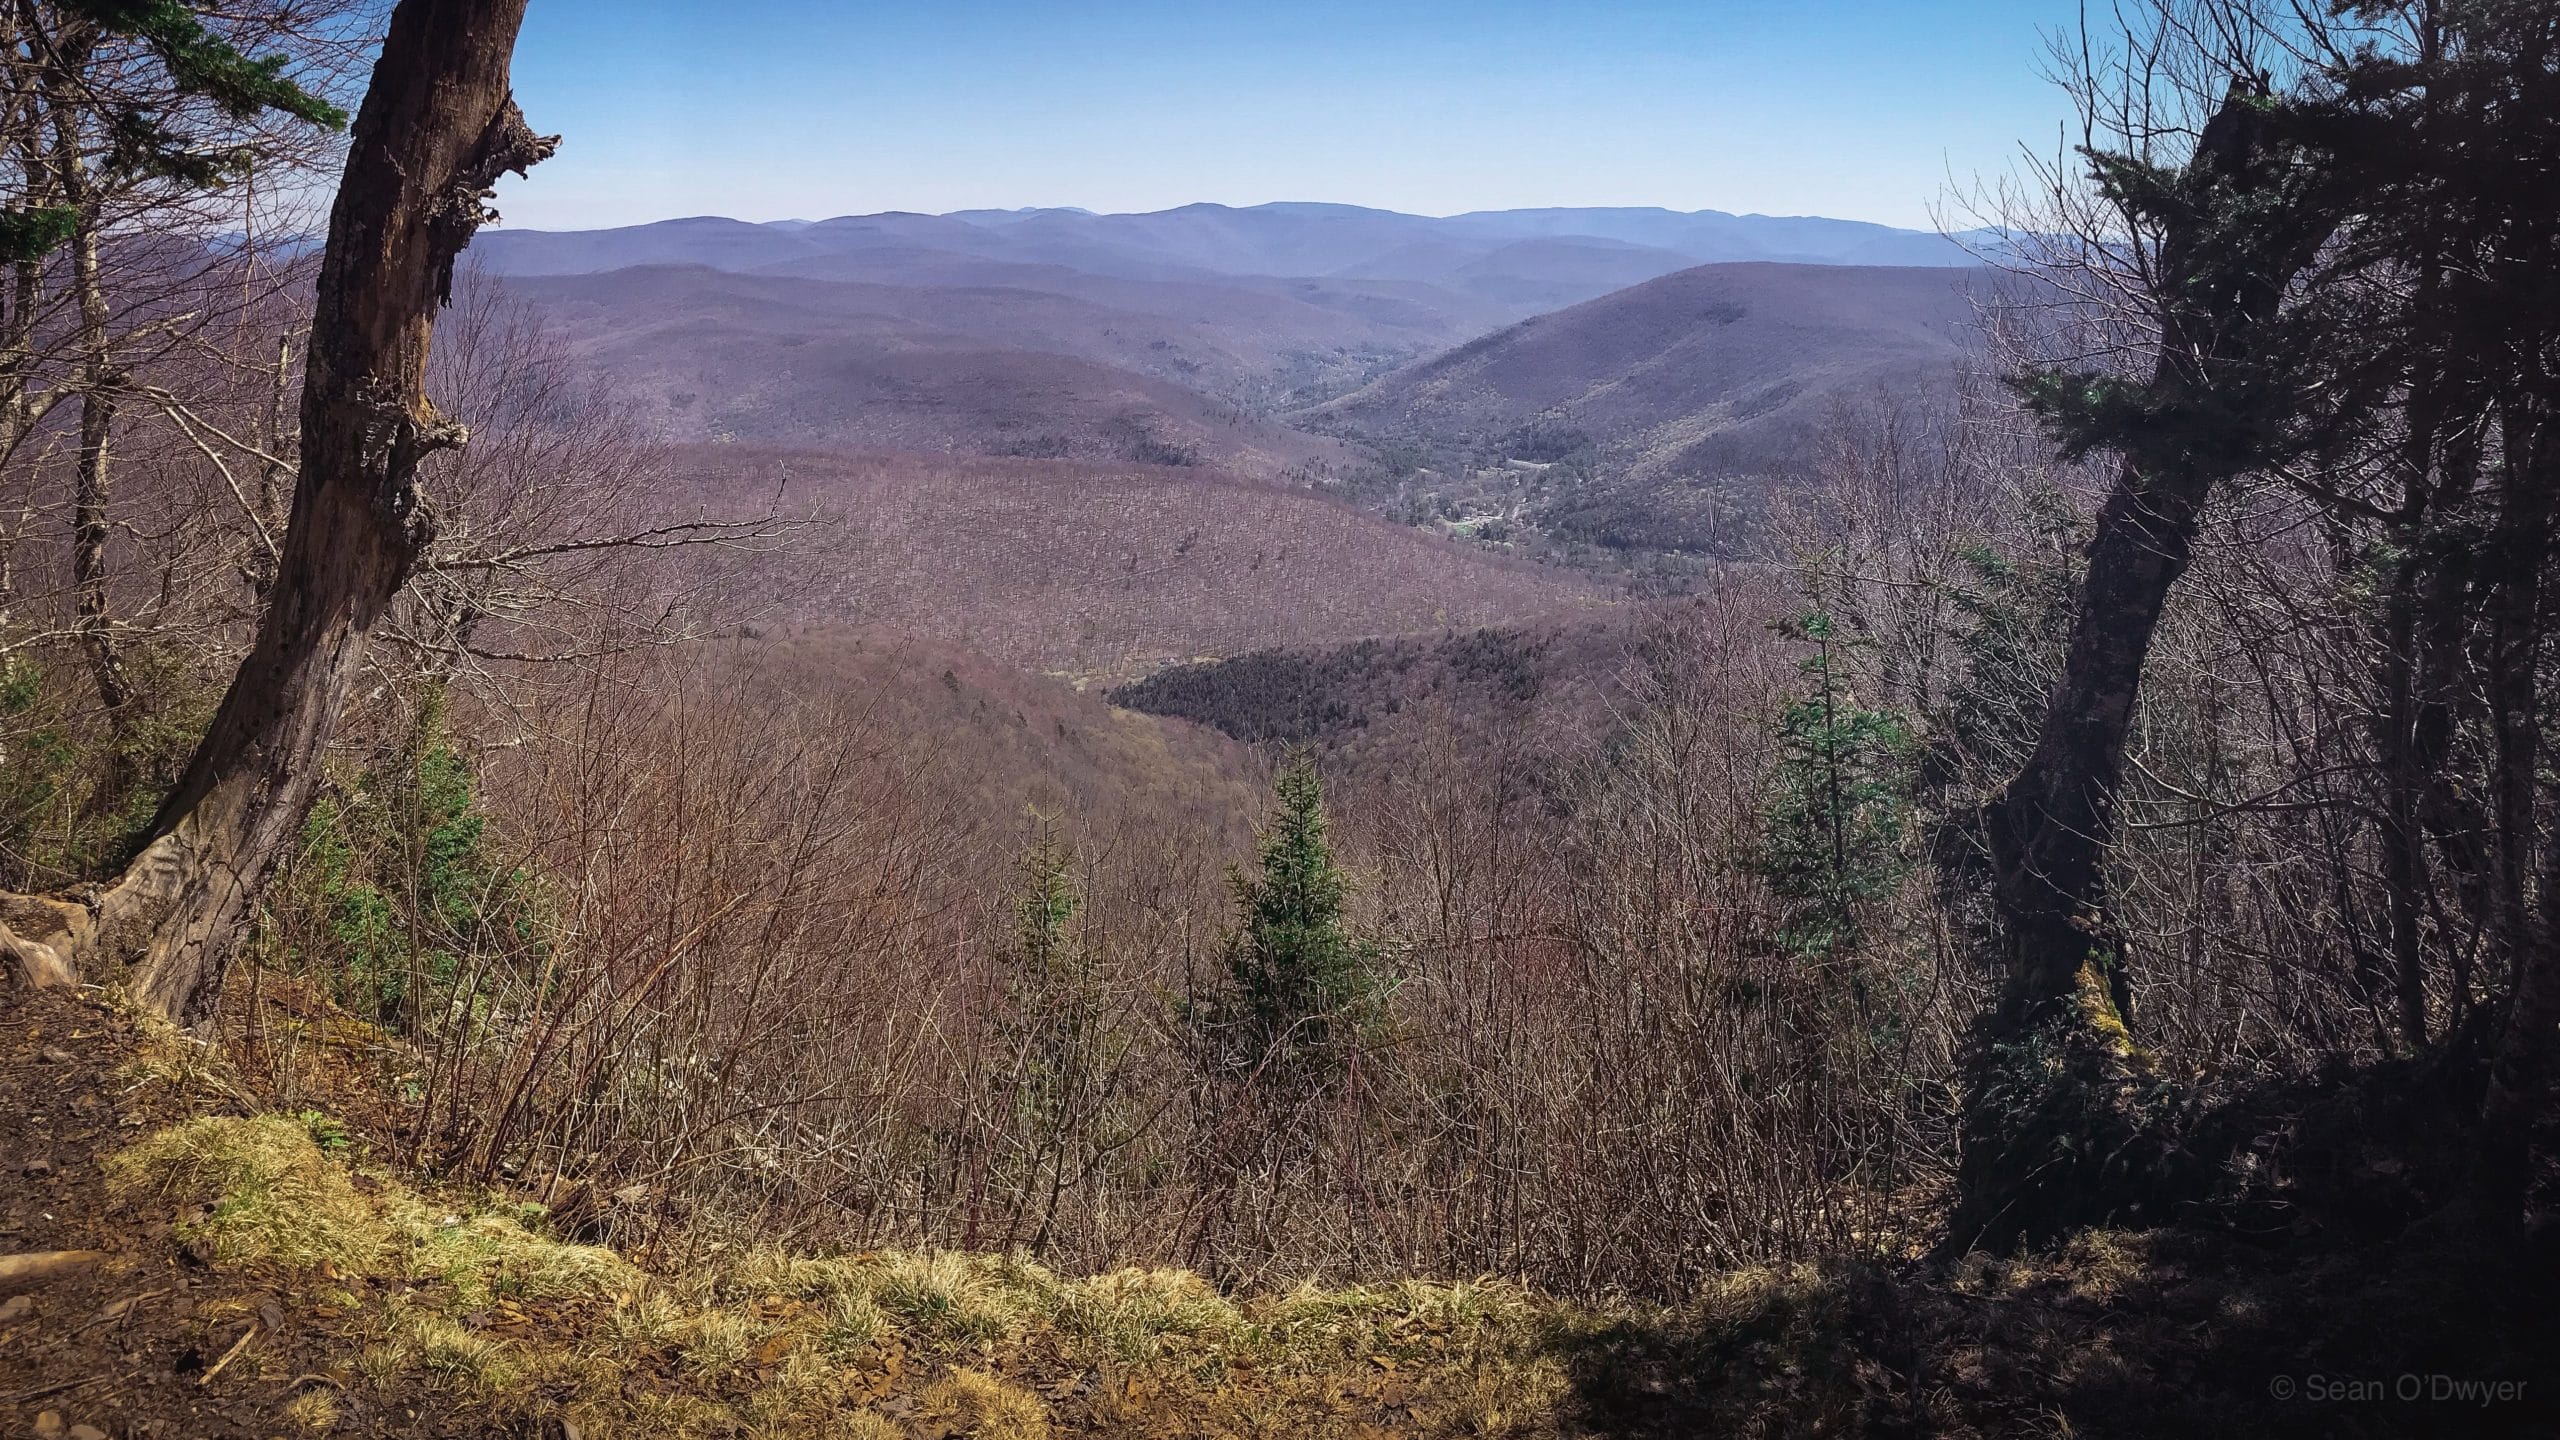 scenic view of Catskills mountains